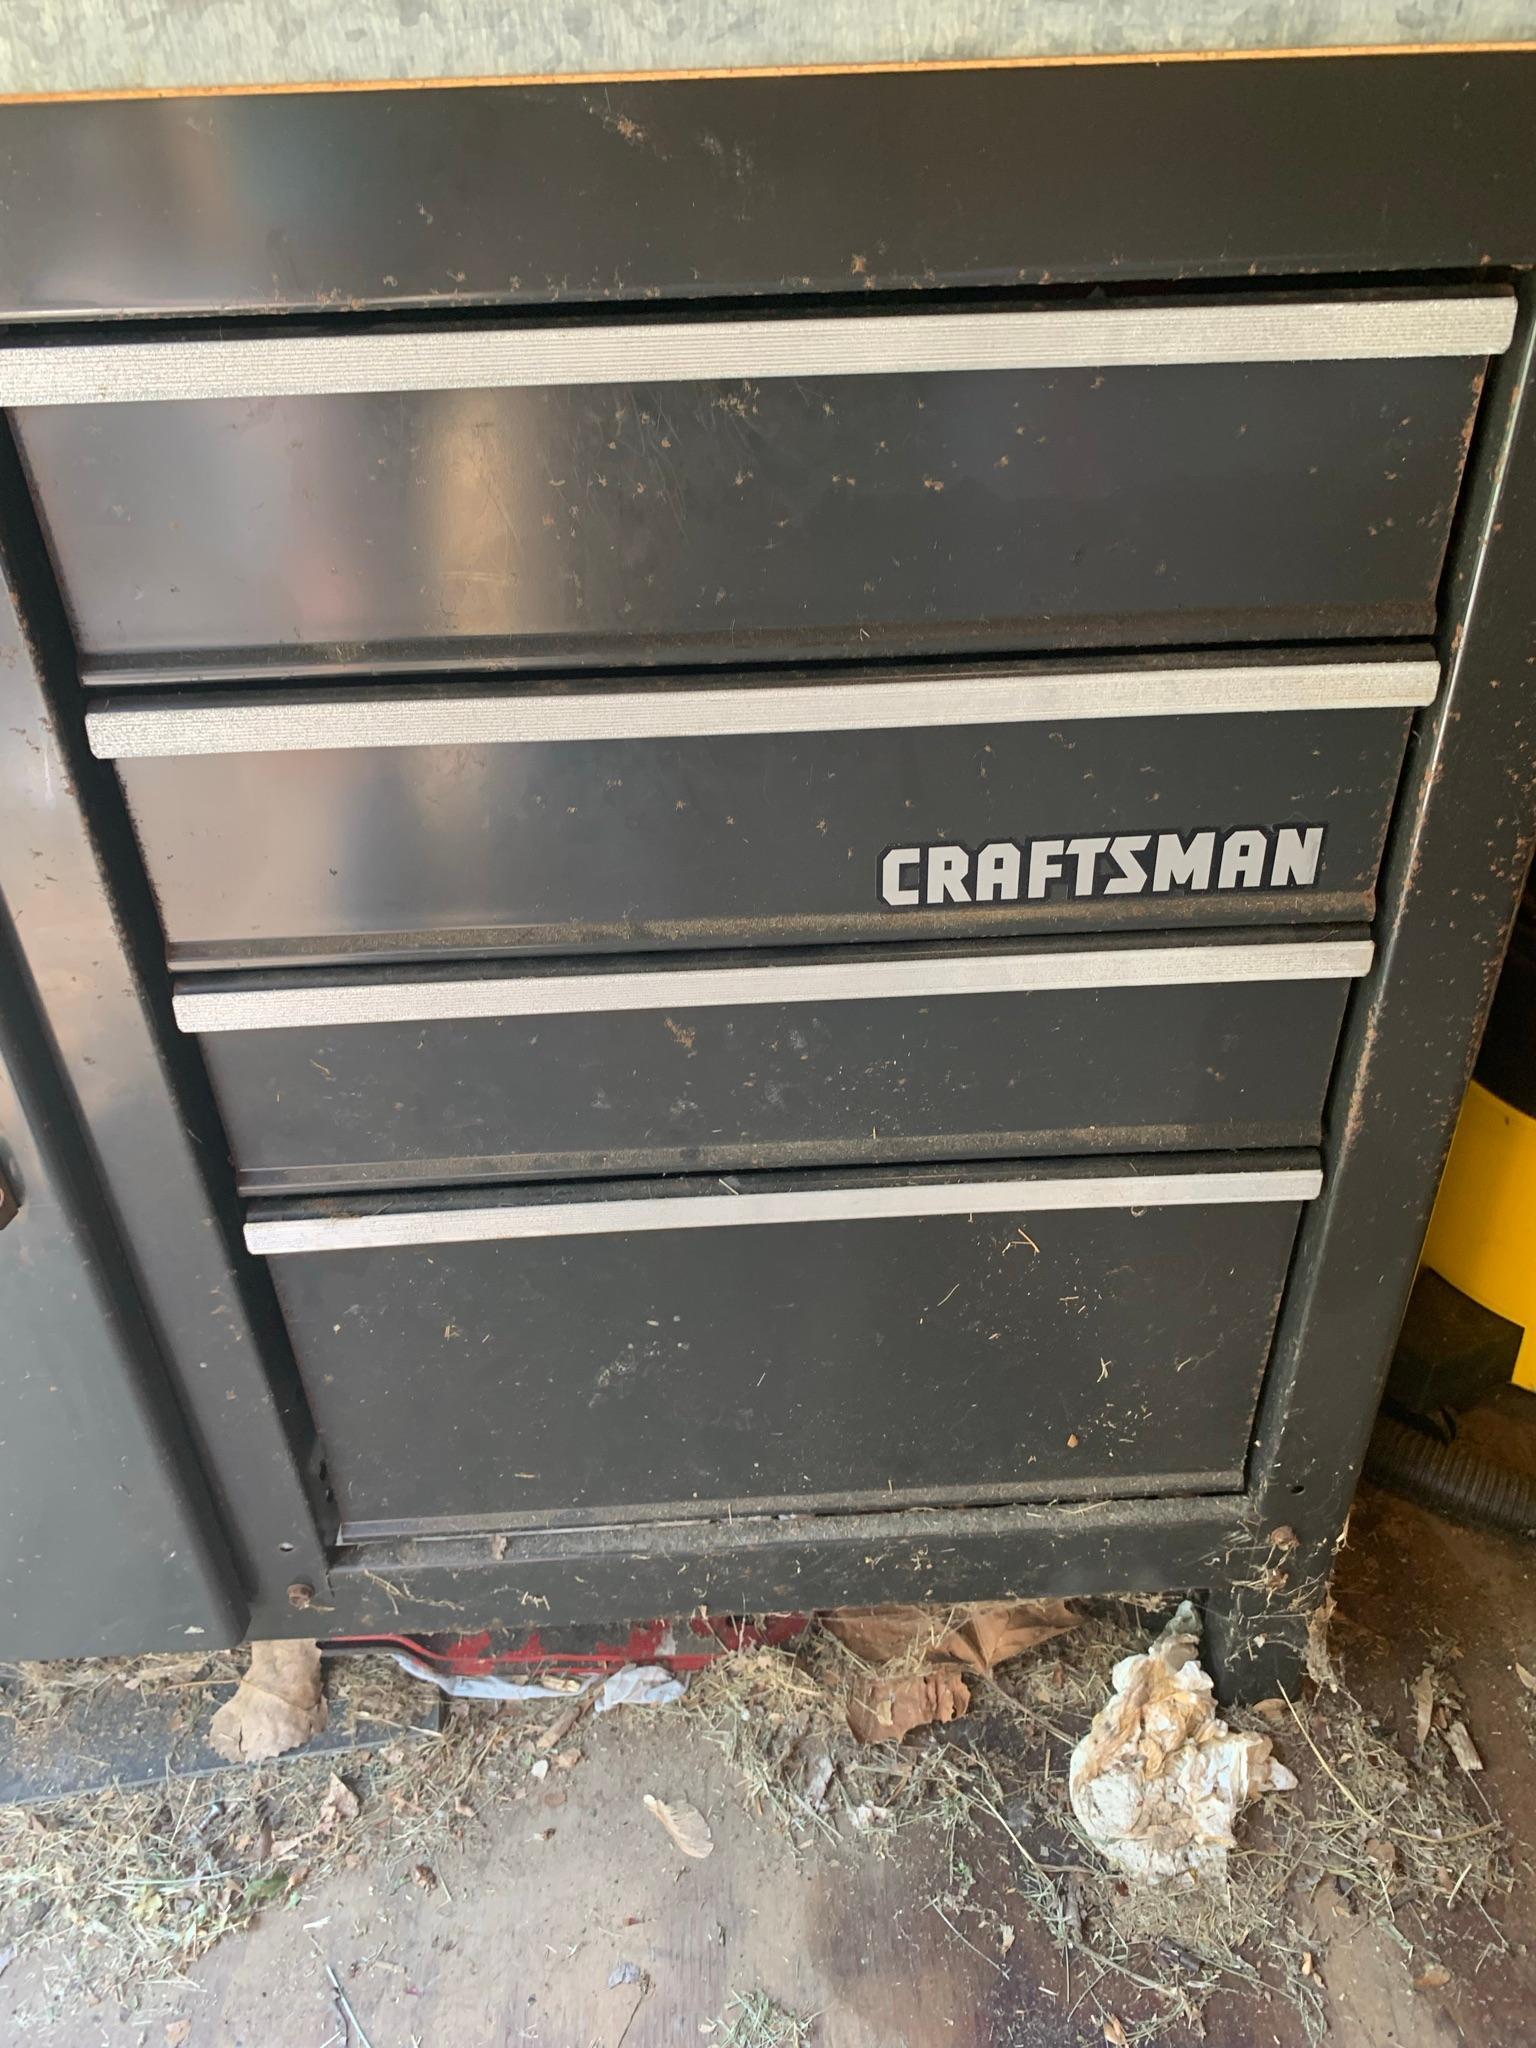 Craftsman Workbench with Contents & Craftsman Work Light. See Photos